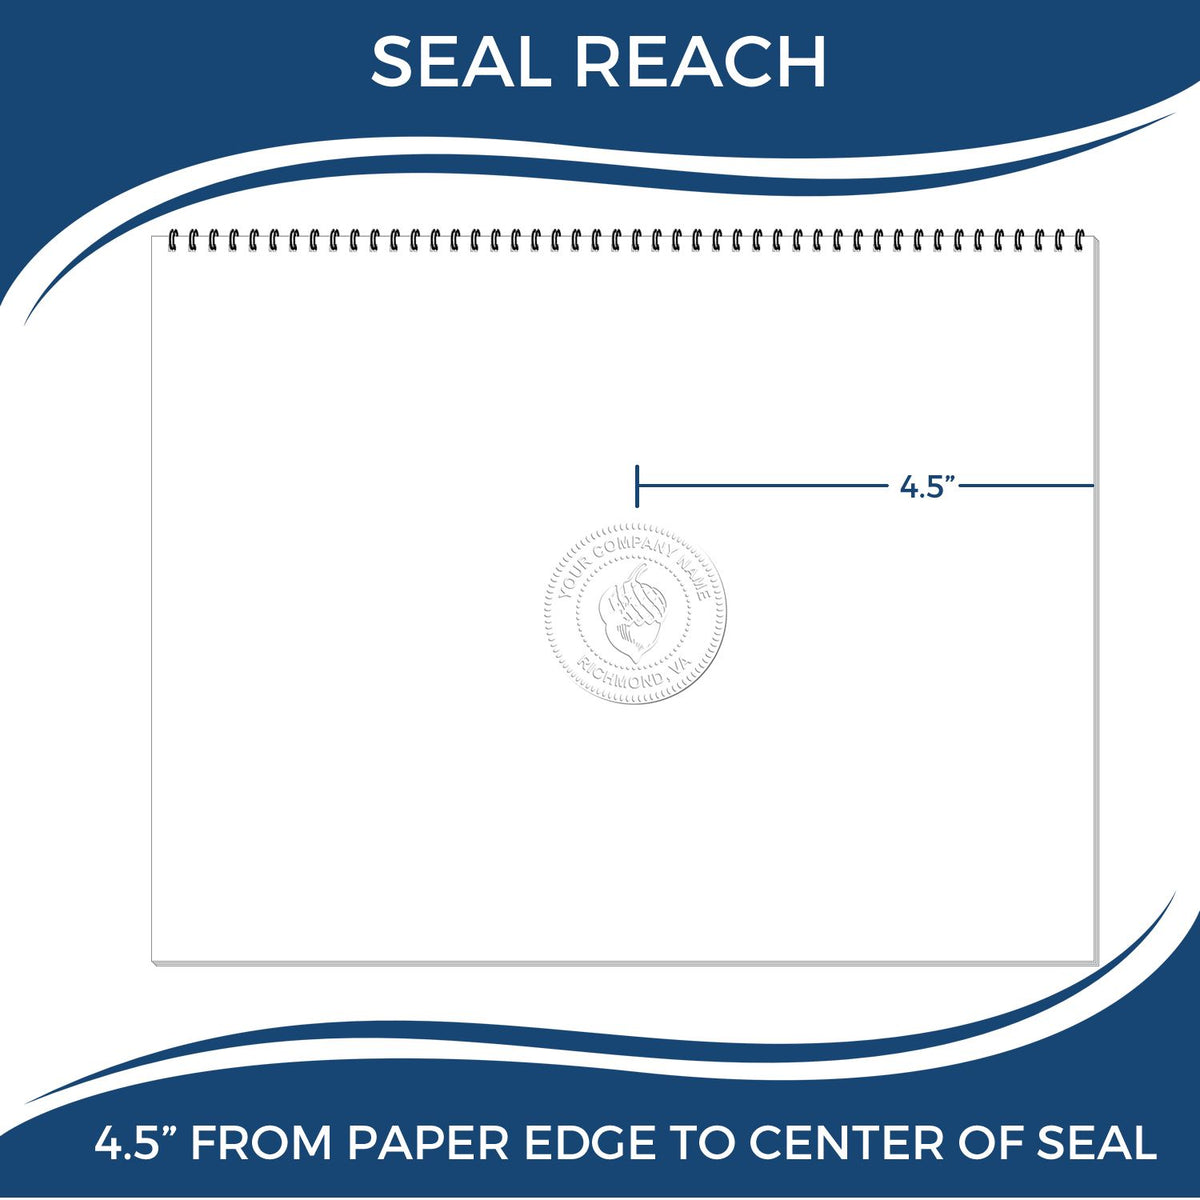 An infographic showing the seal reach which is represented by a ruler and a miniature seal image of the State of Kentucky Extended Long Reach Engineer Seal